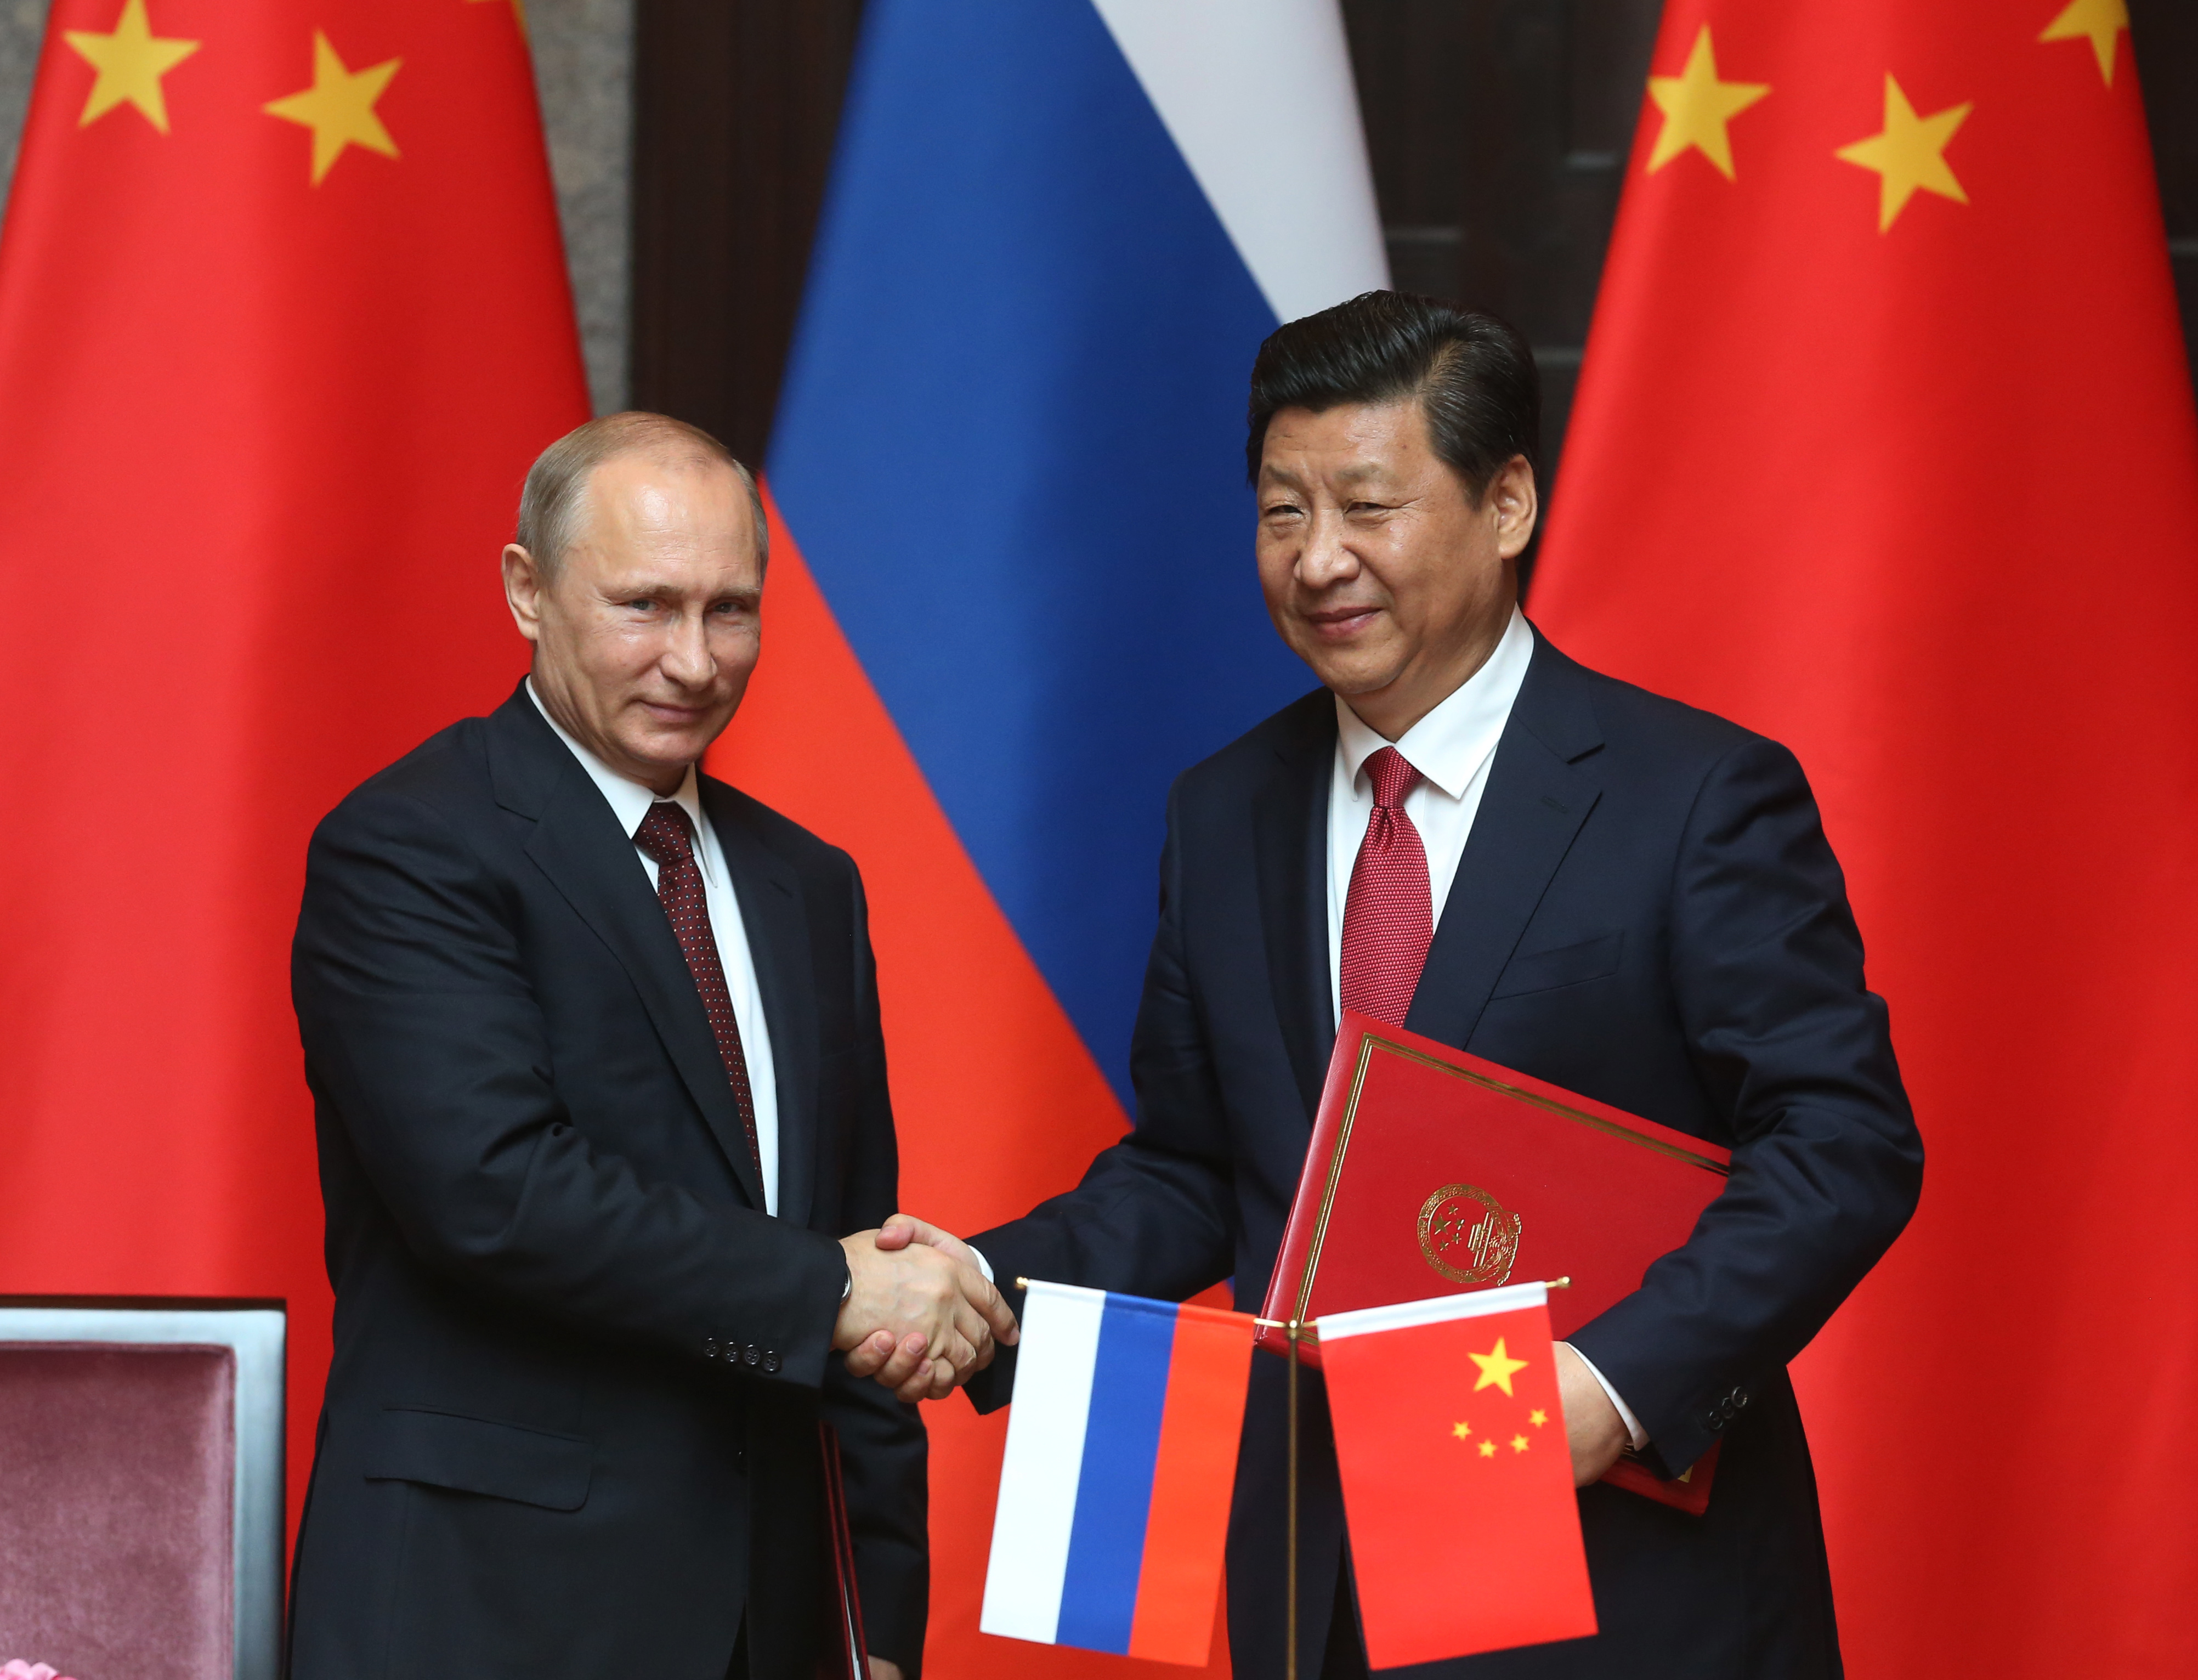 Russian President Vladimir Putin and Chinese President Xi Jingping attend a welcoming ceremony on May 20, 2014 in Shanghai (Sasha Mordovets—Getty Images)